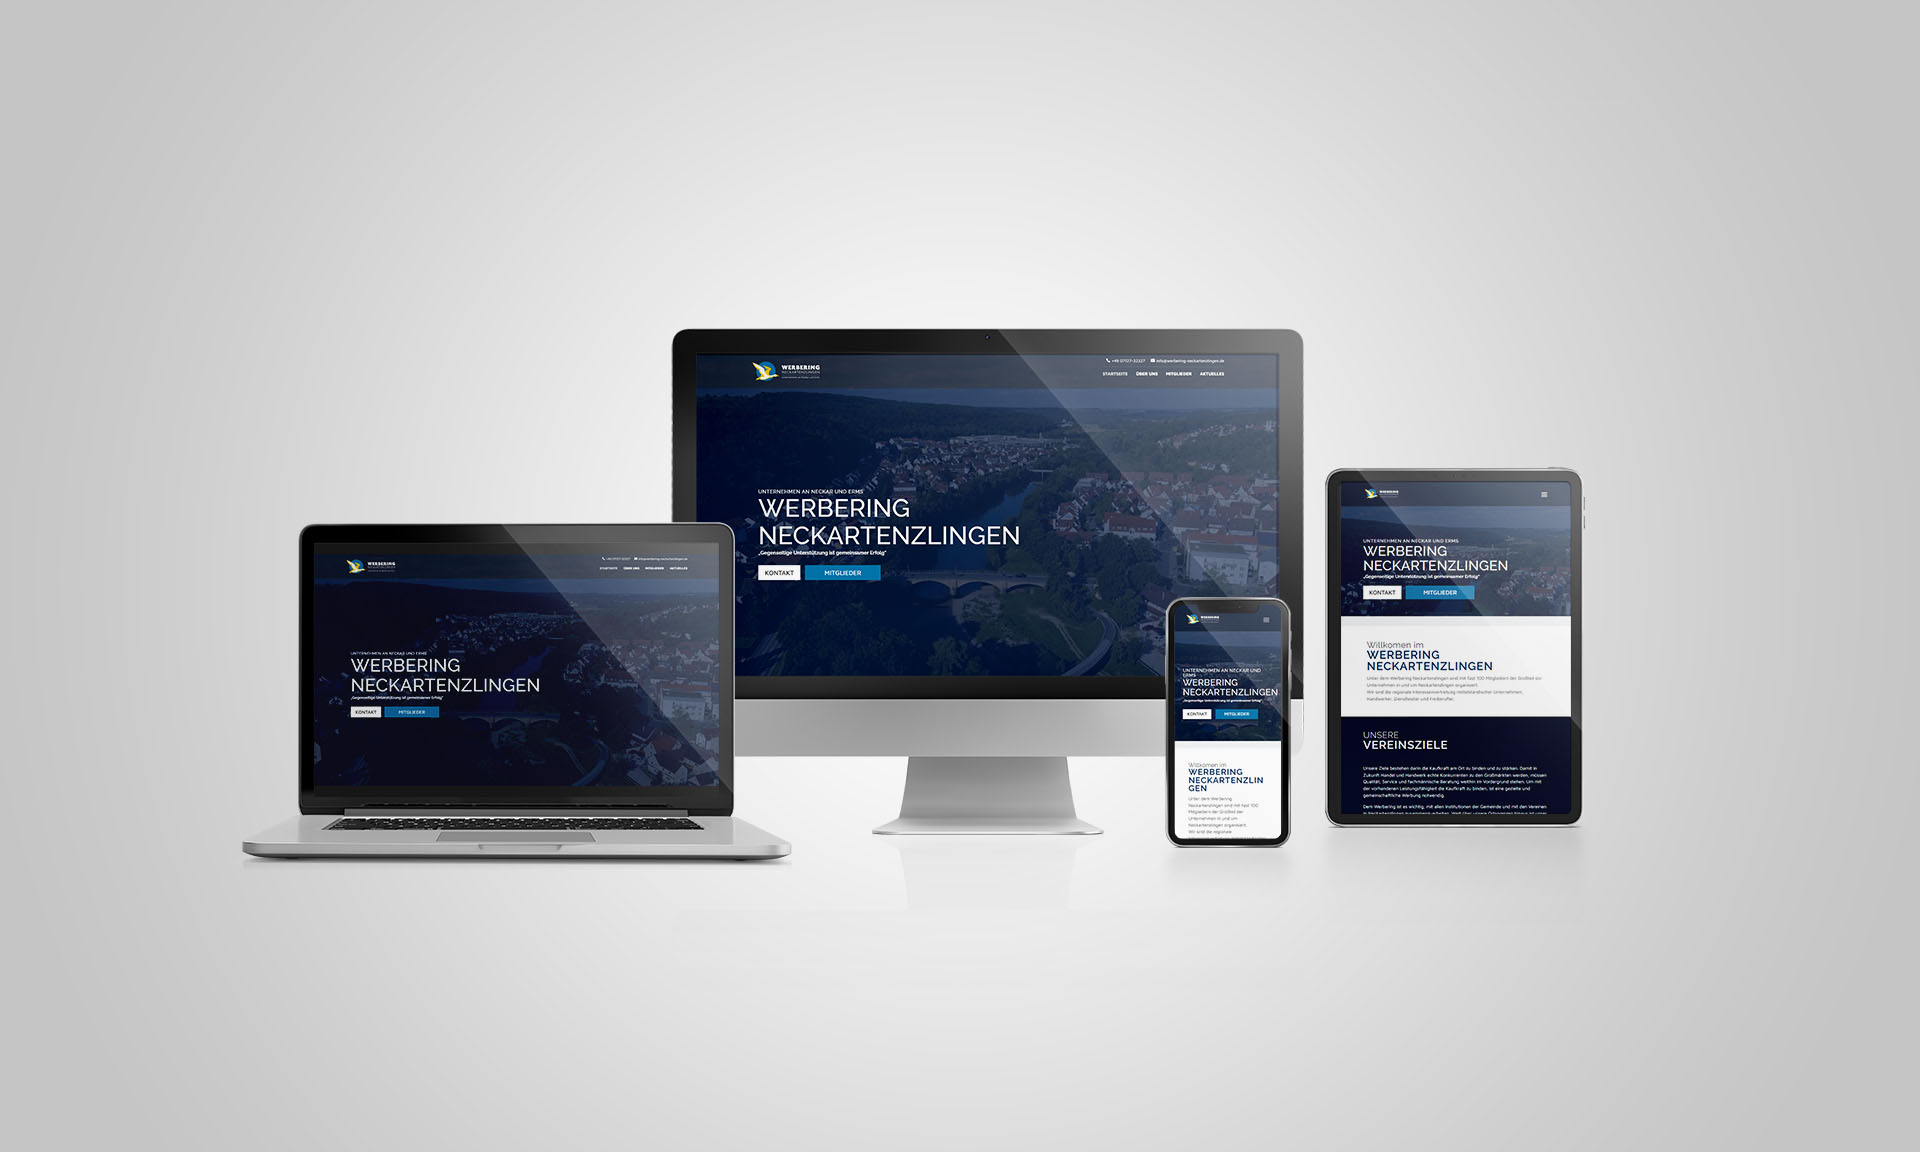 Werbering Responsive Mockups All devices